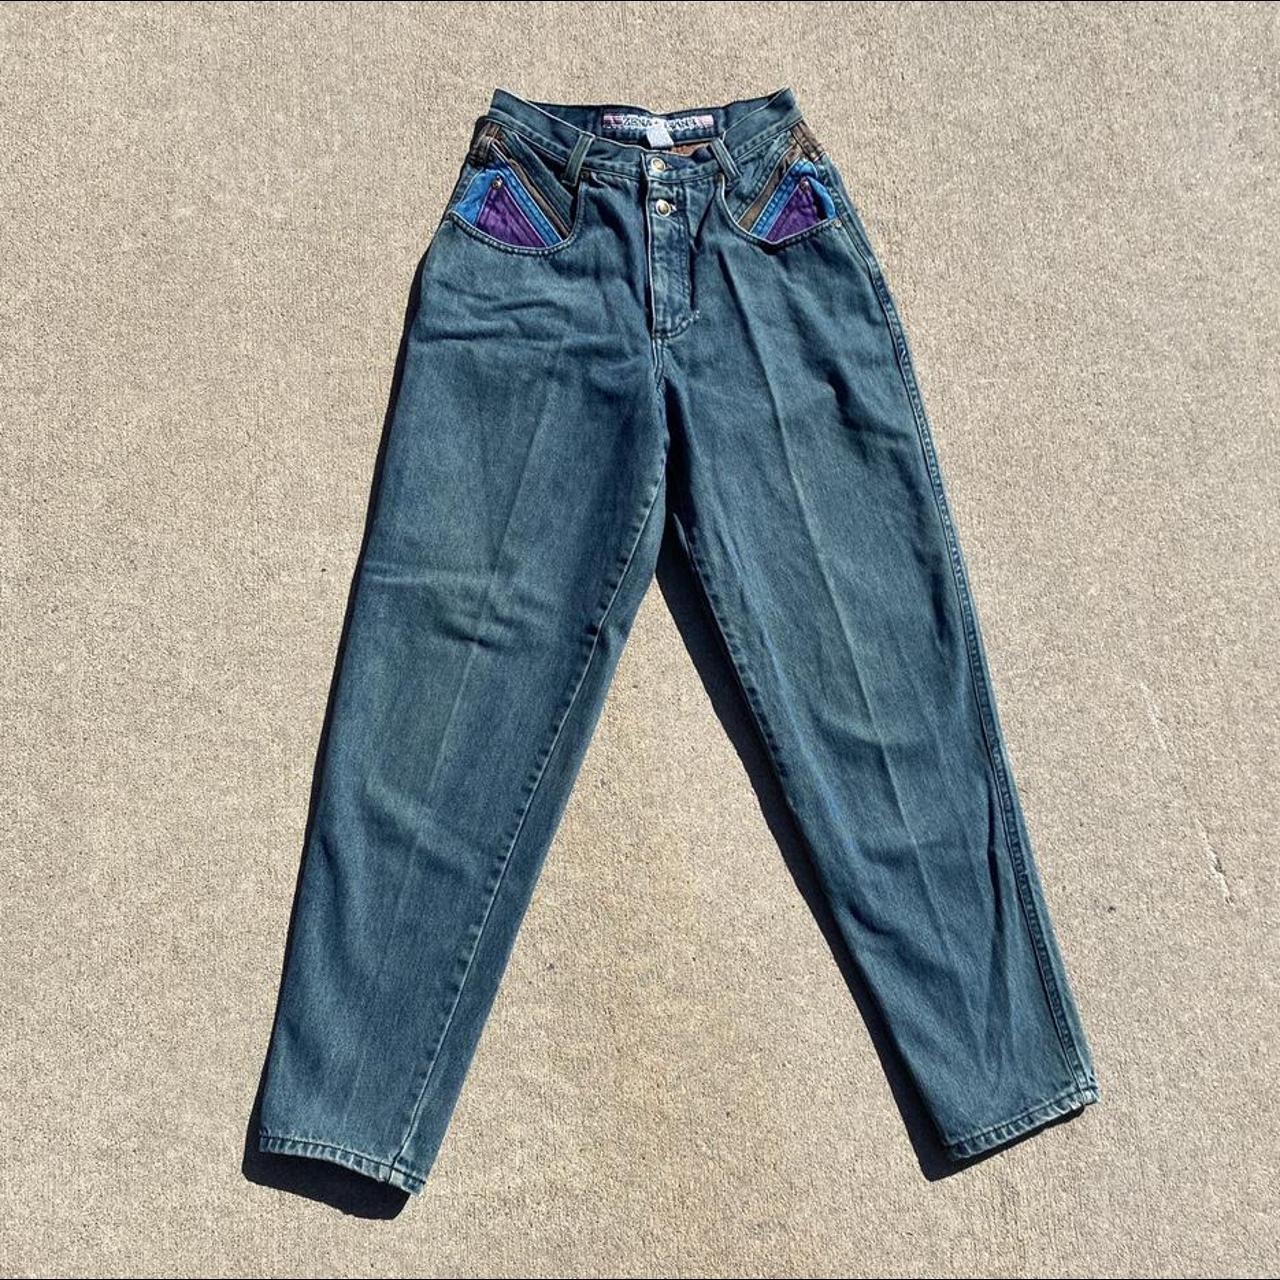 Product Image 3 - vintage 80s zena colorblock jeans

these